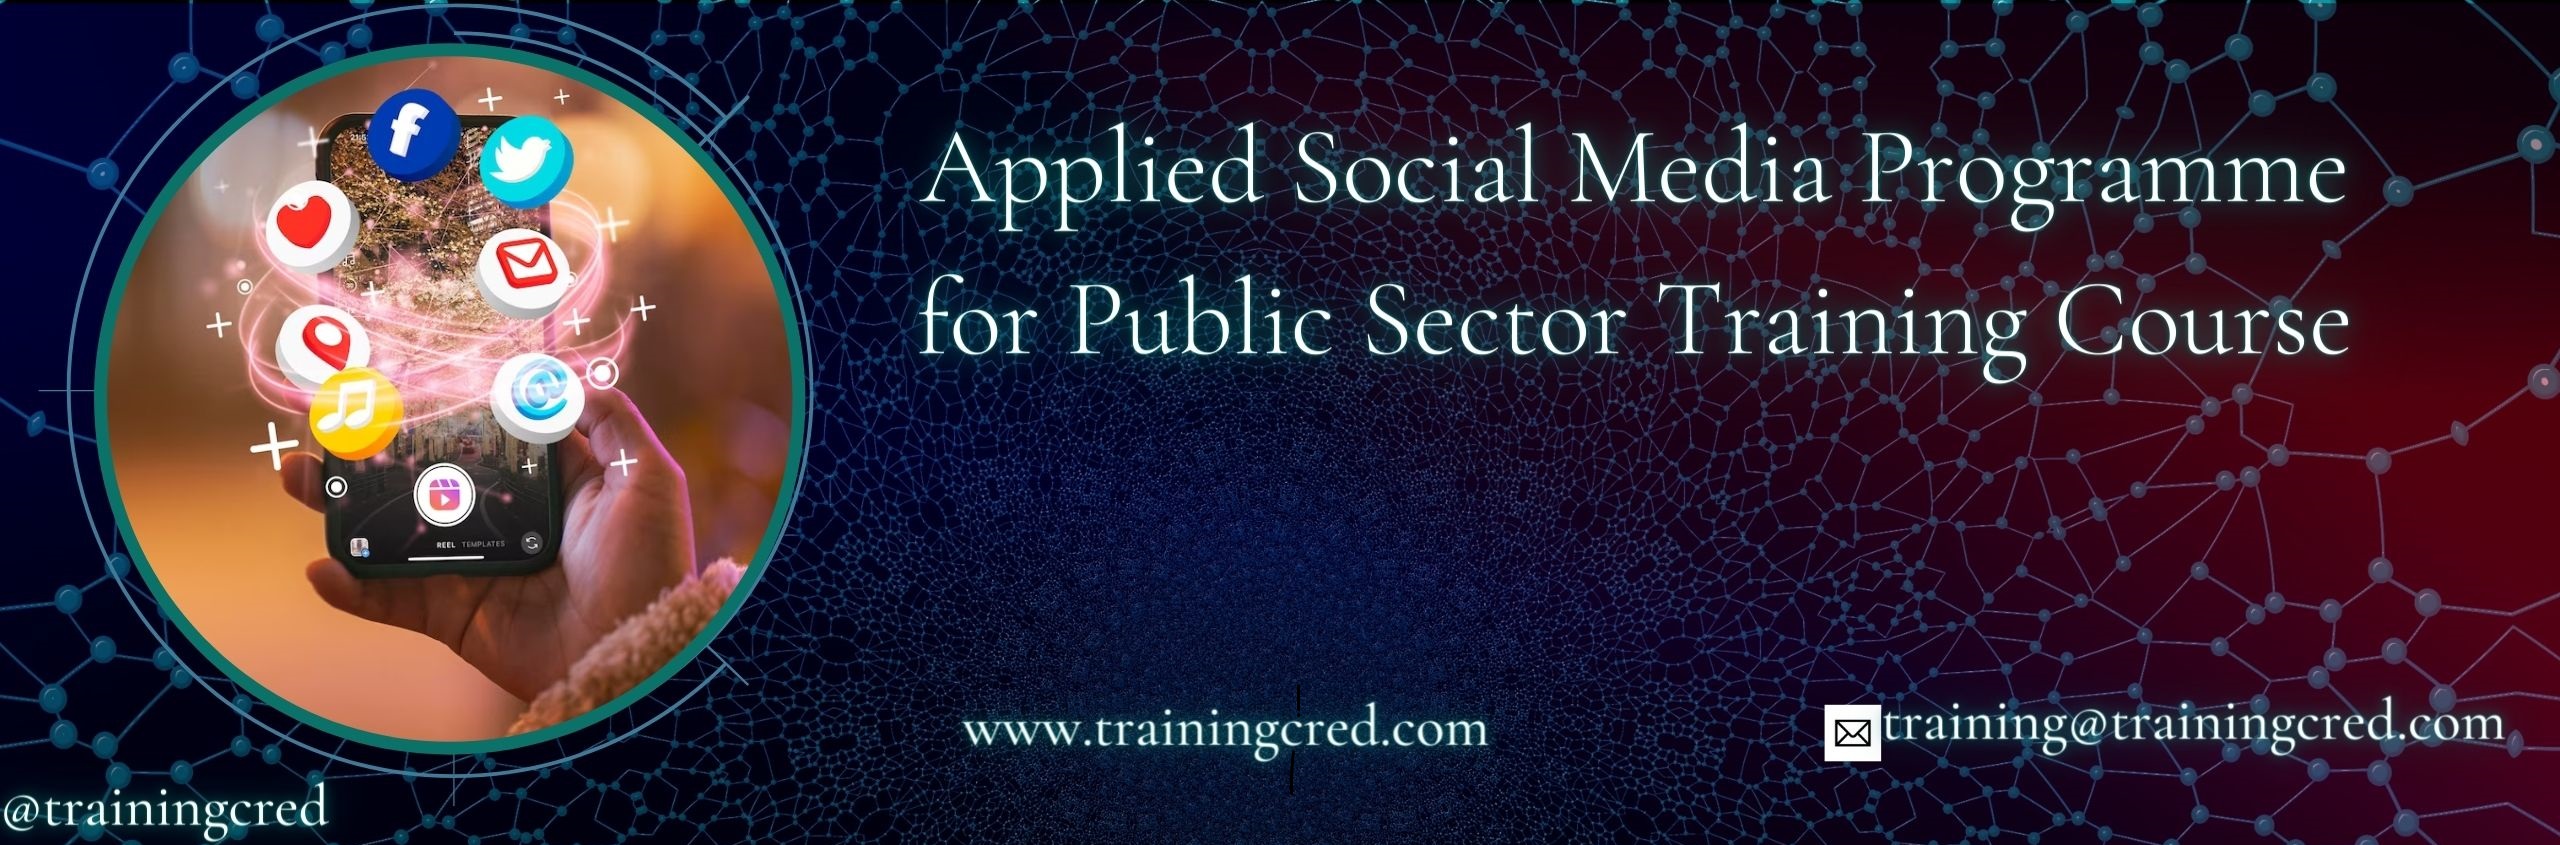 Applied Social Media Programme for Public Sector Training